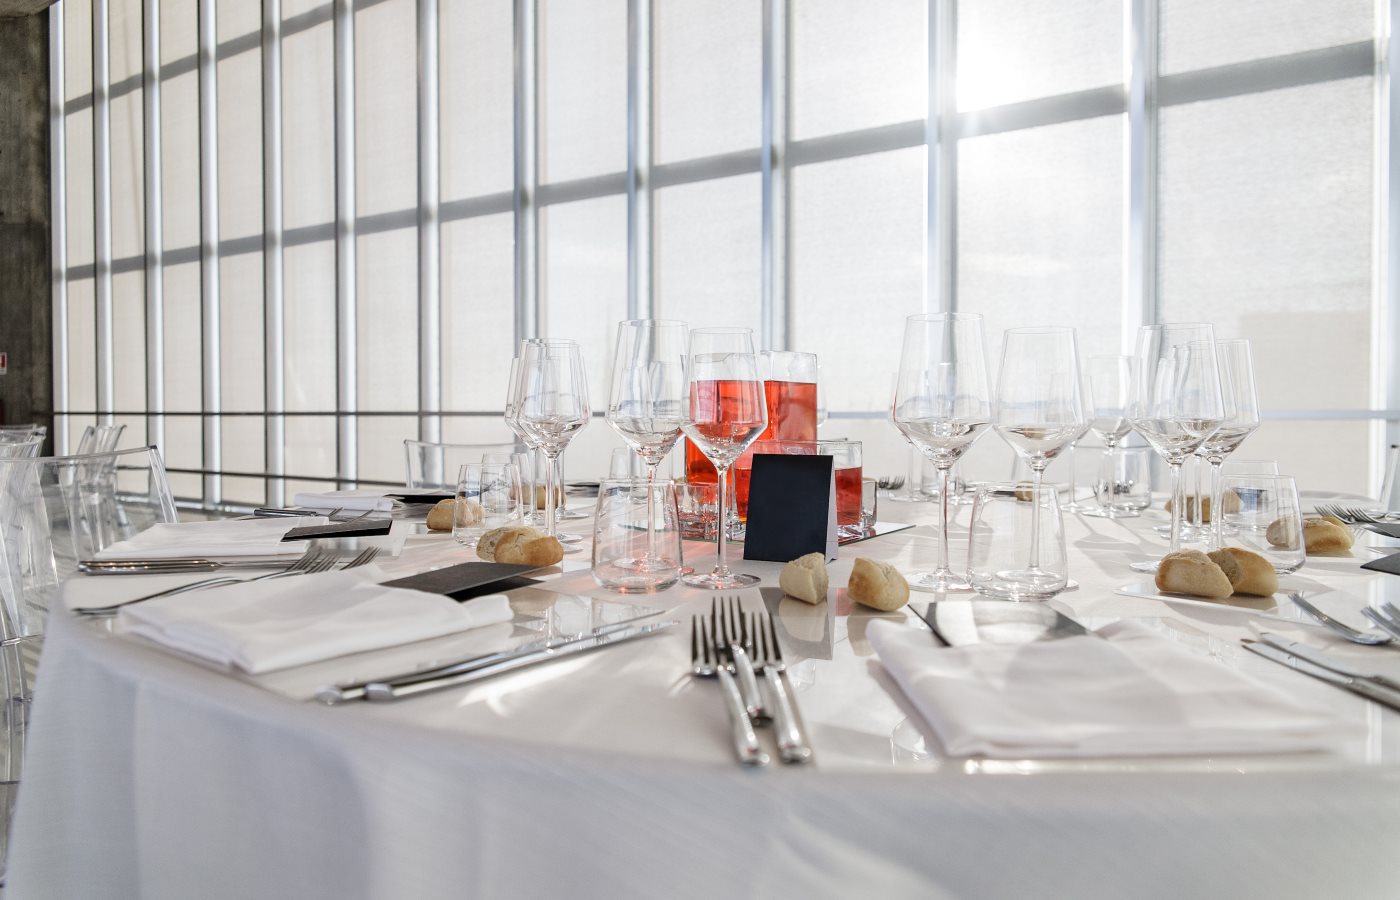 galleries with classic equipment for banqueting and catering